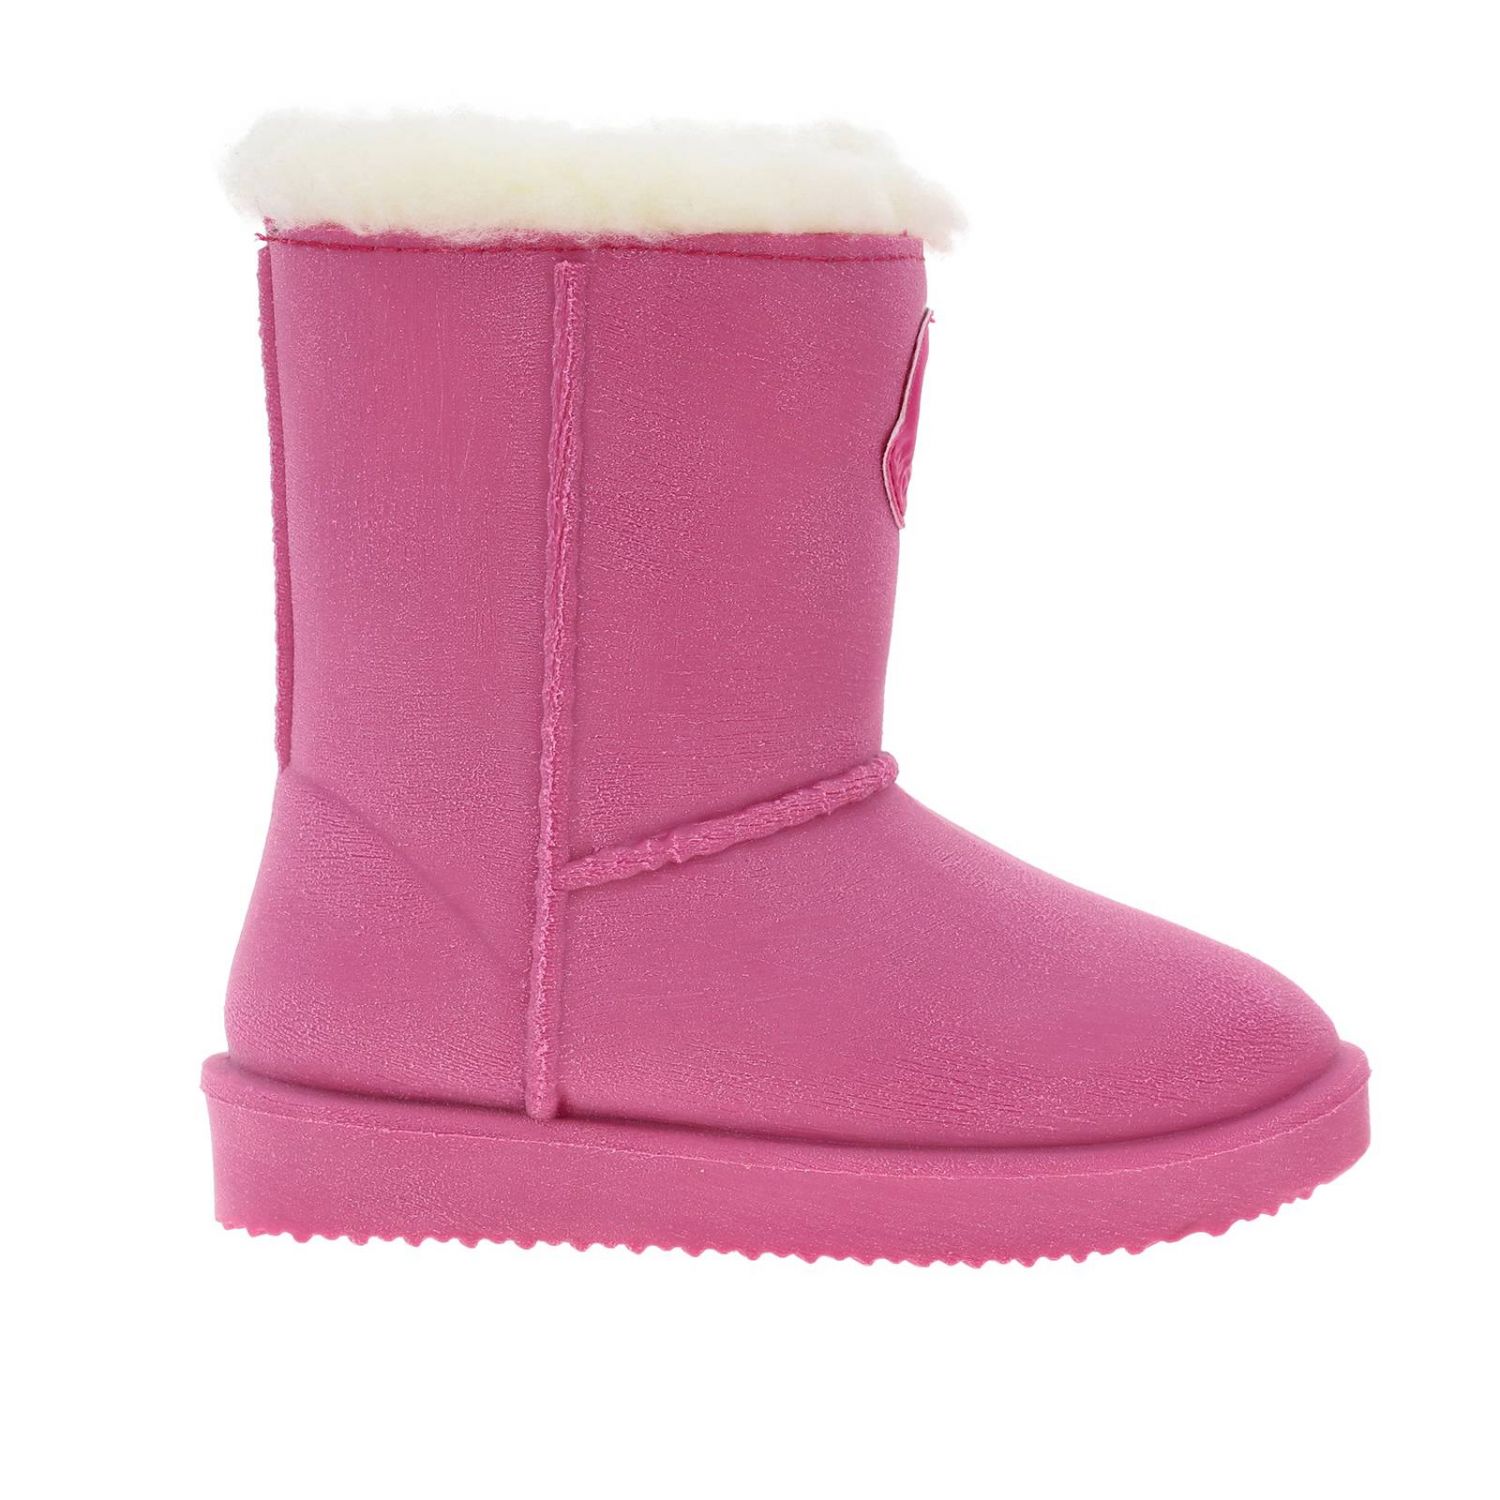 Chaussures Moncler: Chaussures Moncler fille rose 1